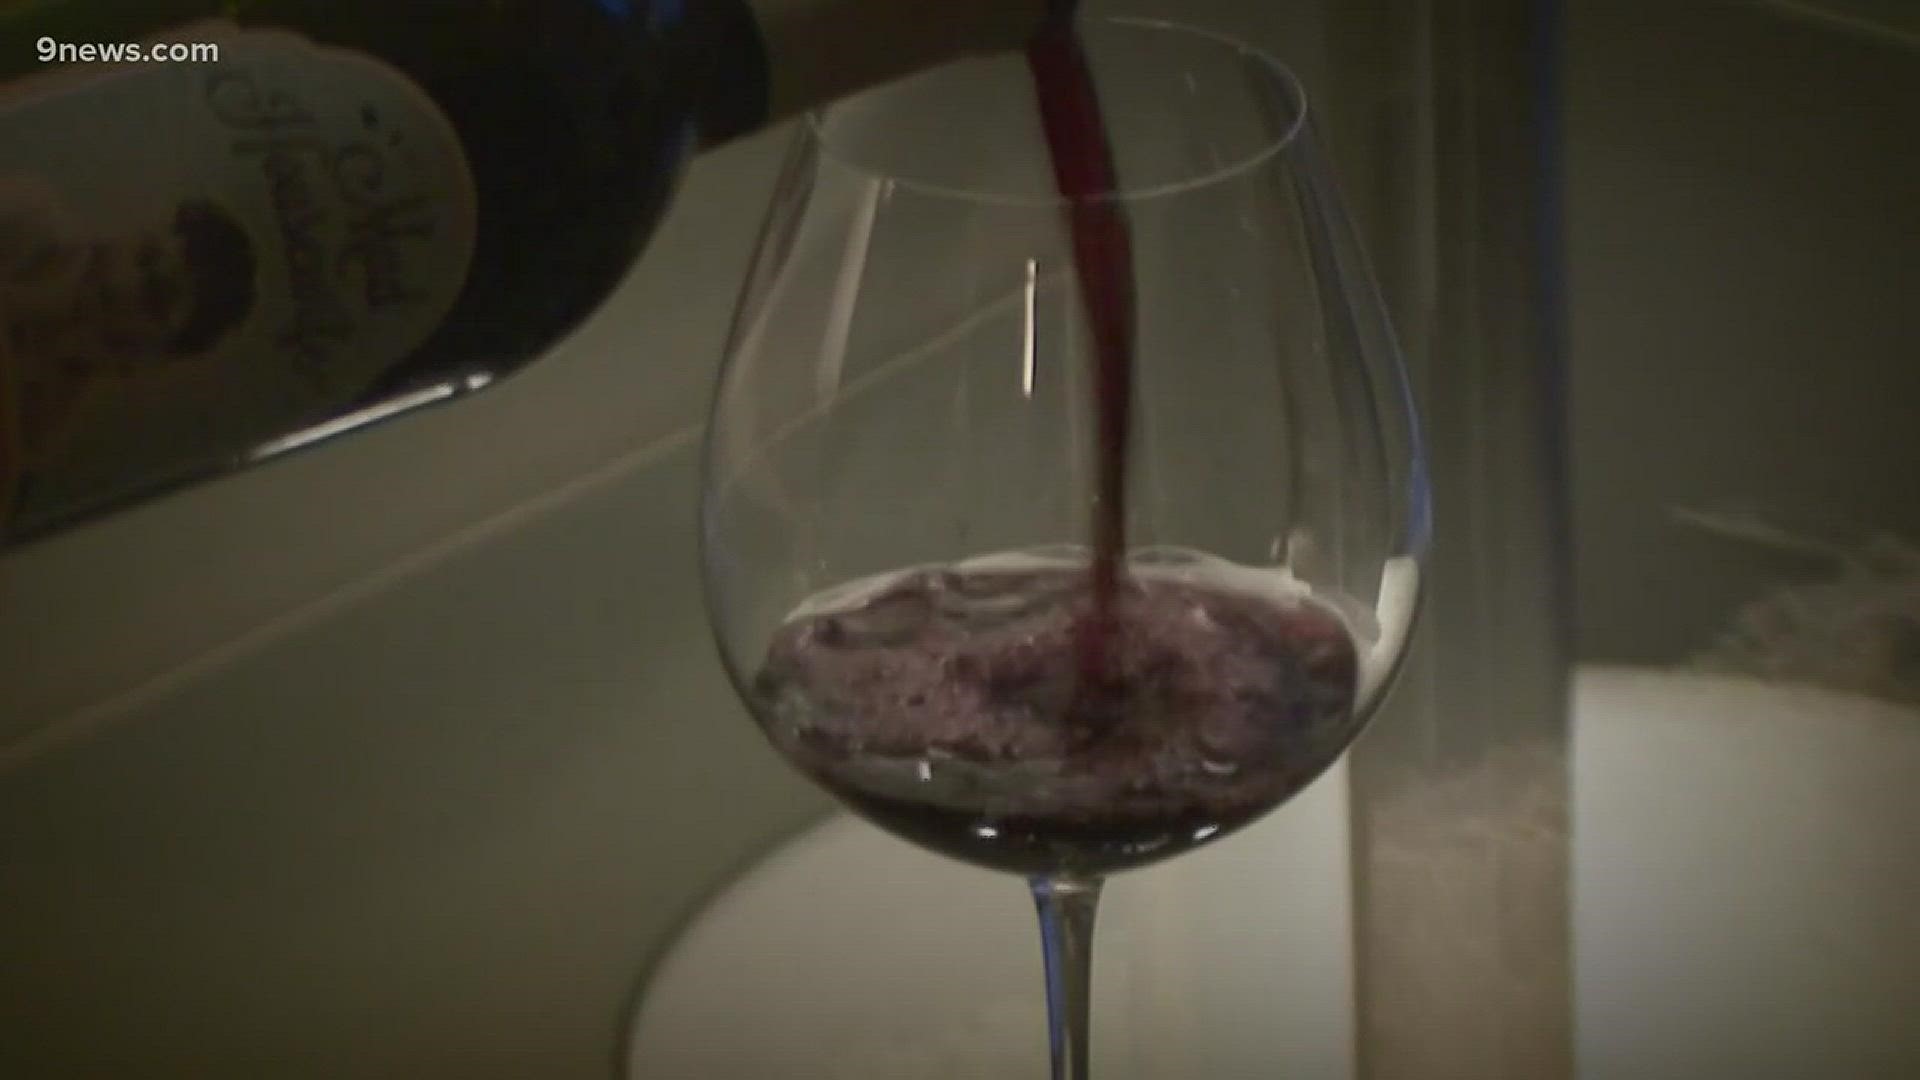 Looking to try some new wines this Thanksgiving, but don't want to waste an entire bottle to find something you like? One local company is helping with that and doing so by giving back to the community.